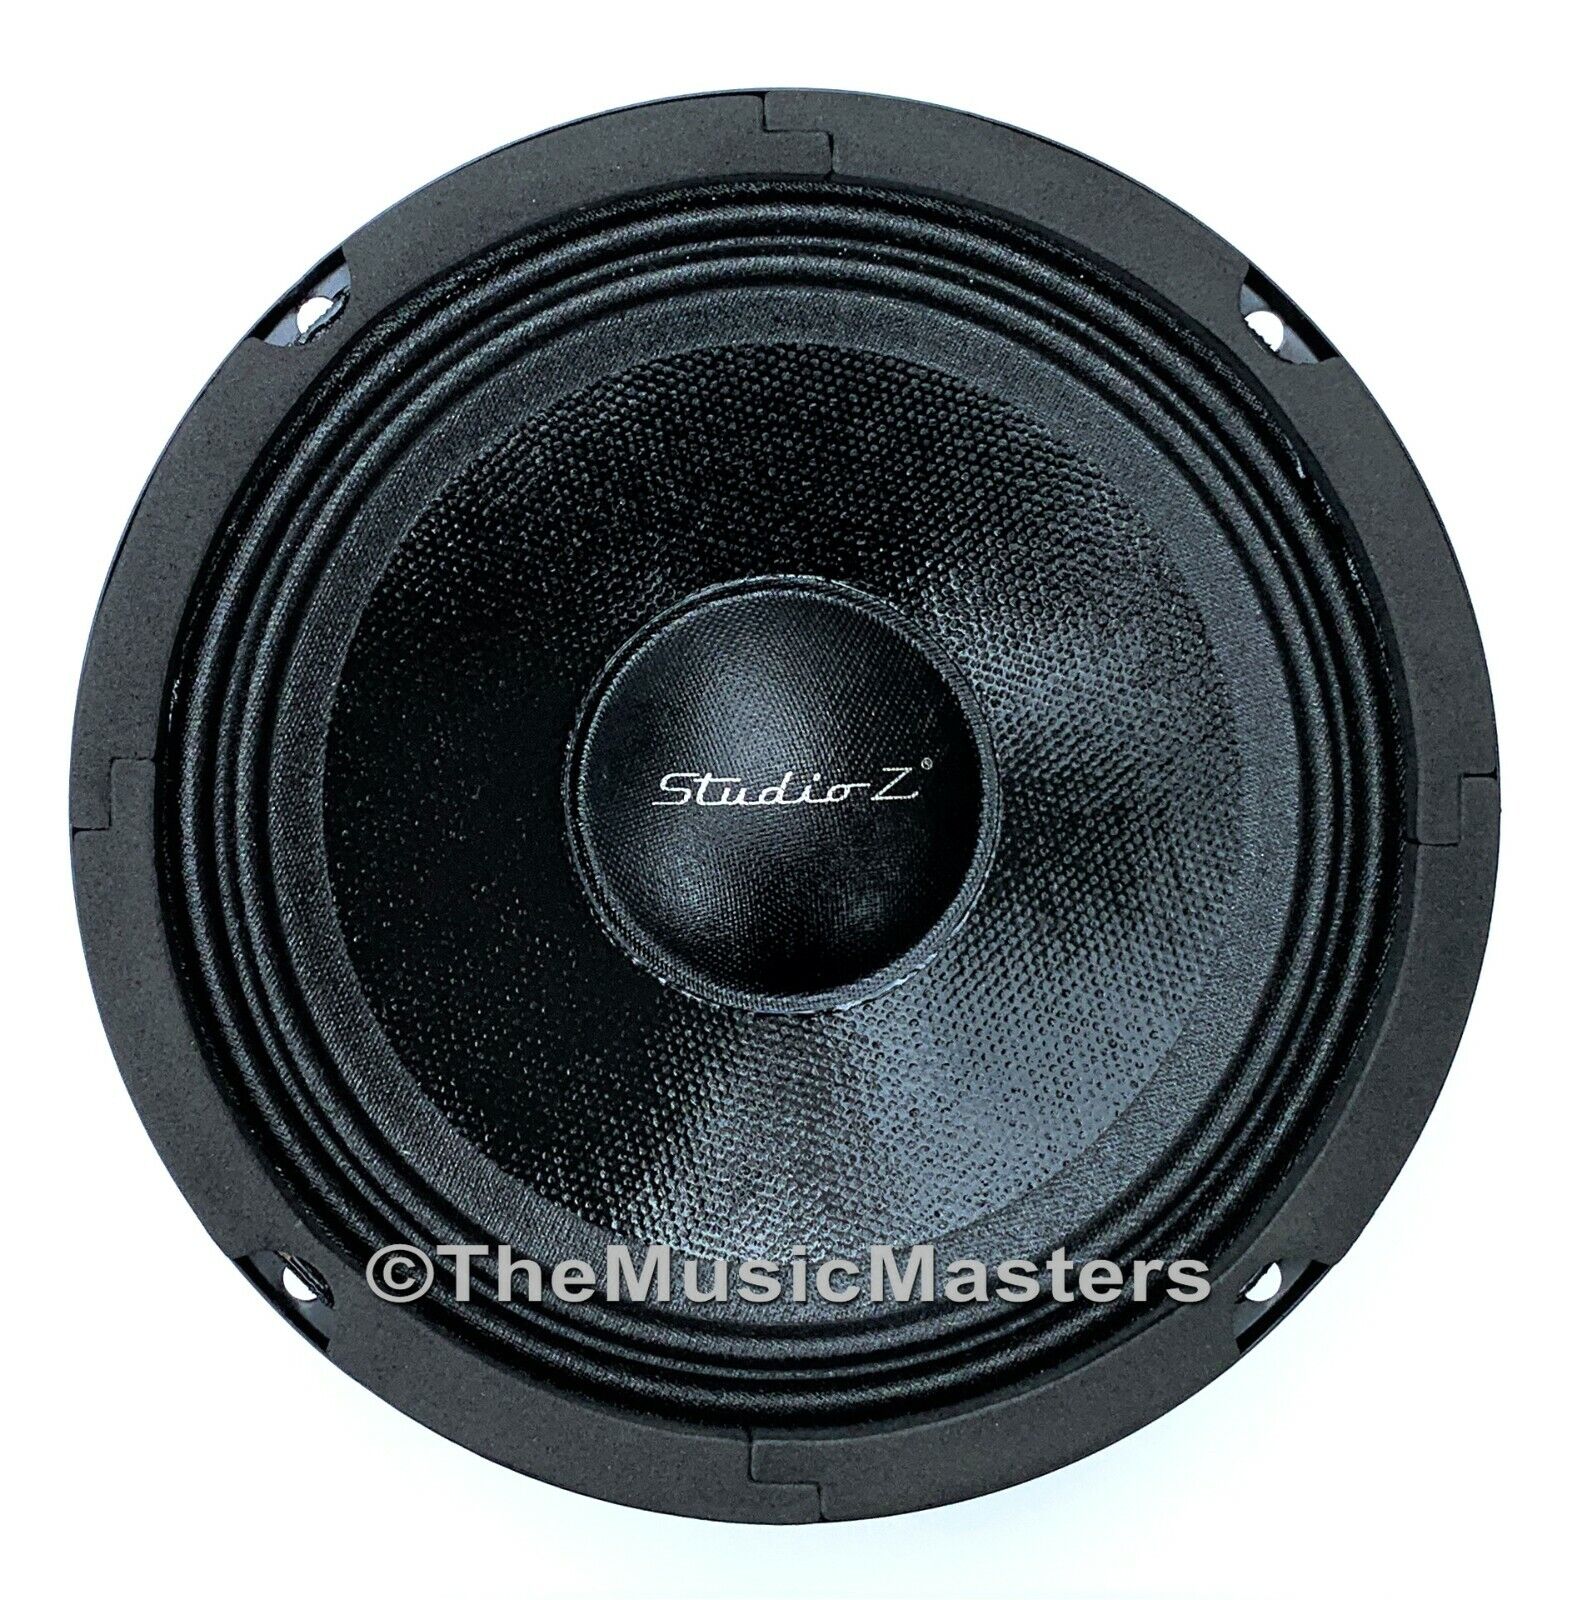 6.5 inch Home Car Audio Studio Sound WOOFER Subwoofer Stereo Replacement Speaker